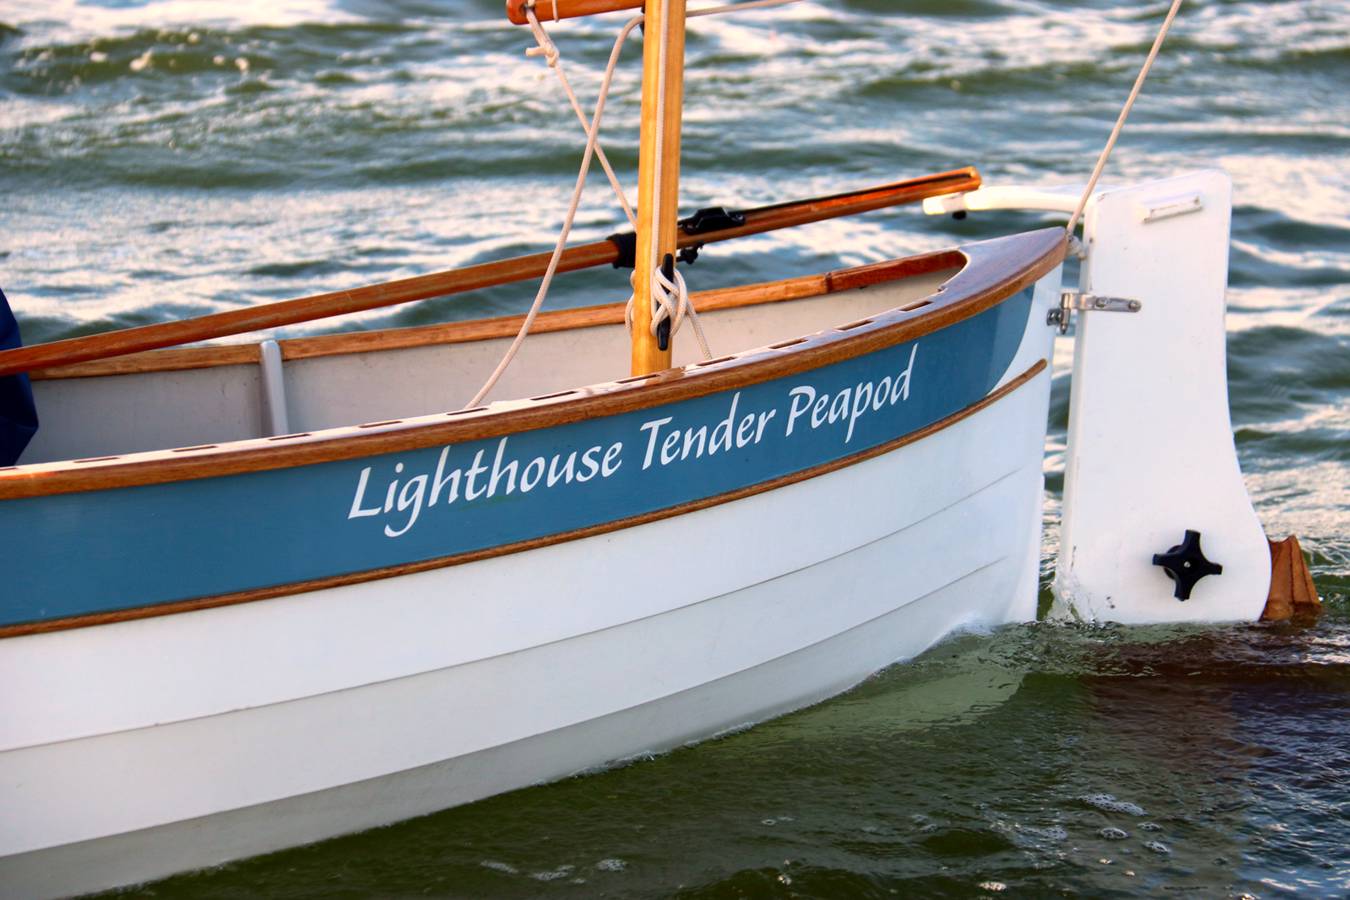 The yawl rig of the Lighthouse Tender Peapod uses a push-pull tiller